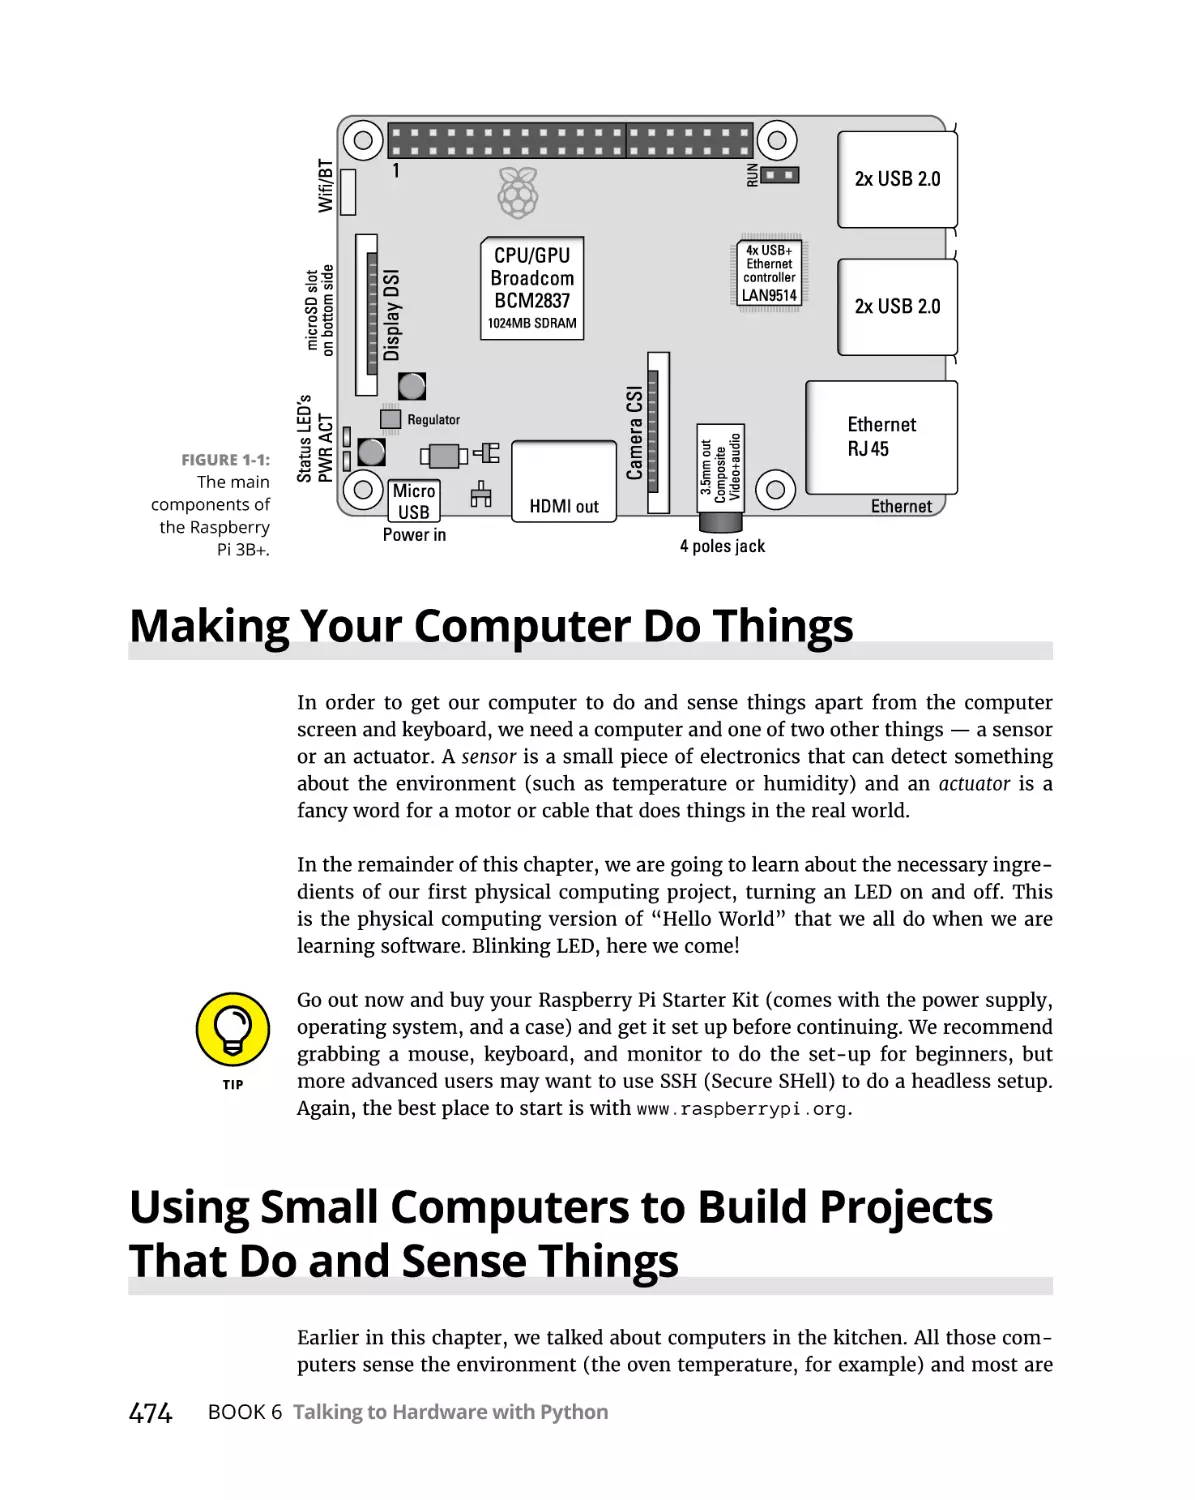 Making Your Computer Do Things
Using Small Computers to Build Projects That Do and Sense Things